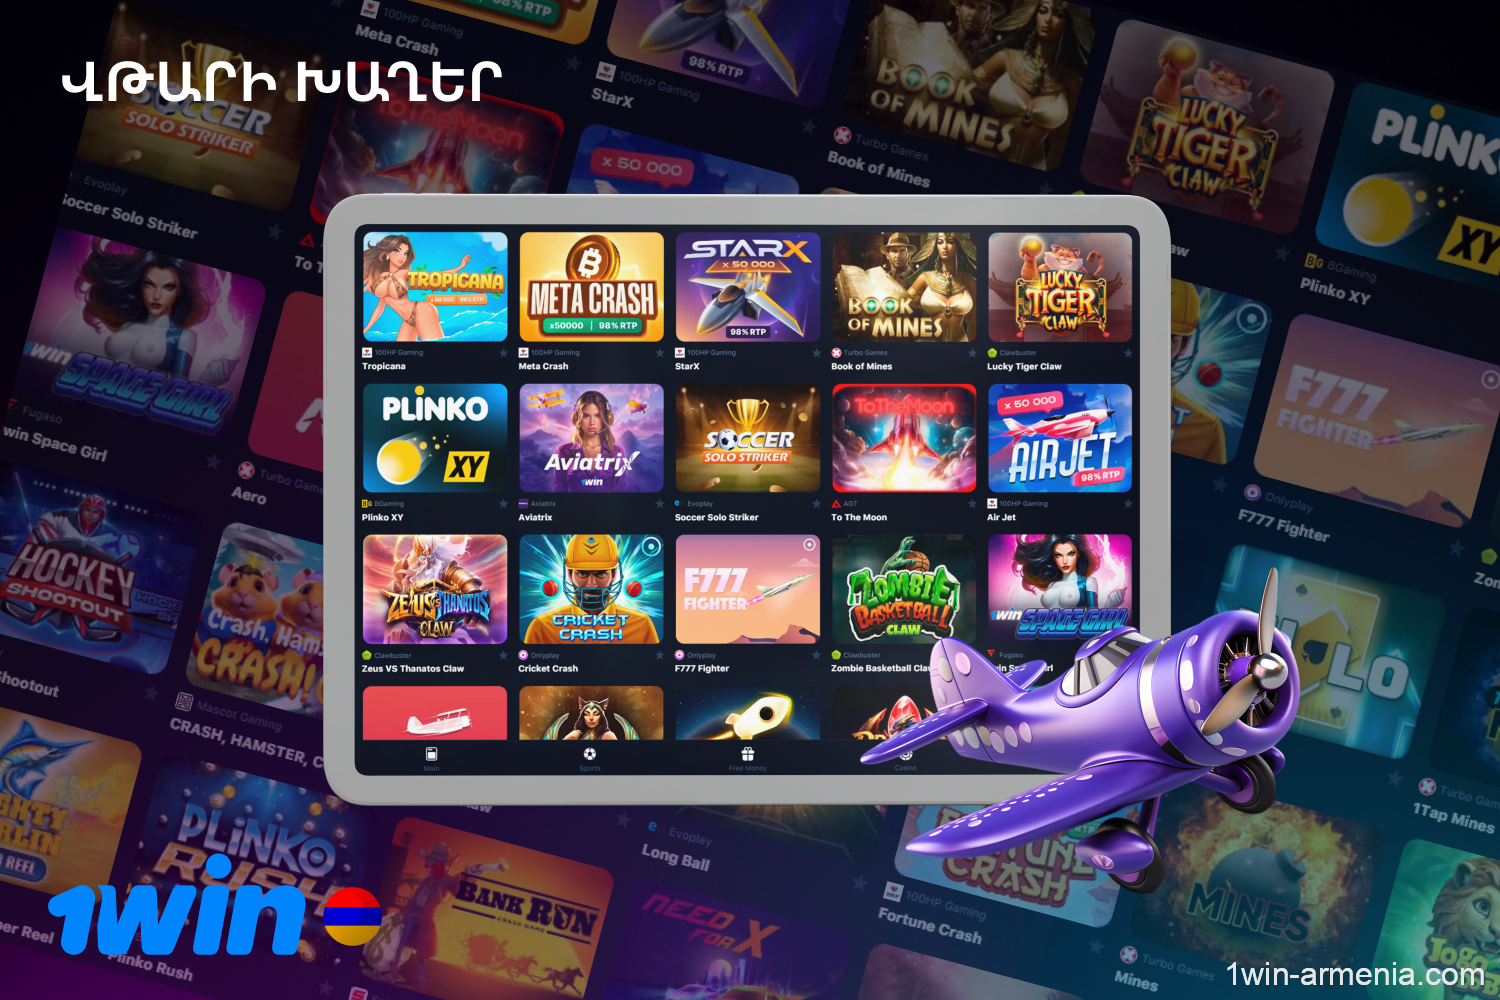 1win casino collection offers Armenian users a large number of fast games with instant results